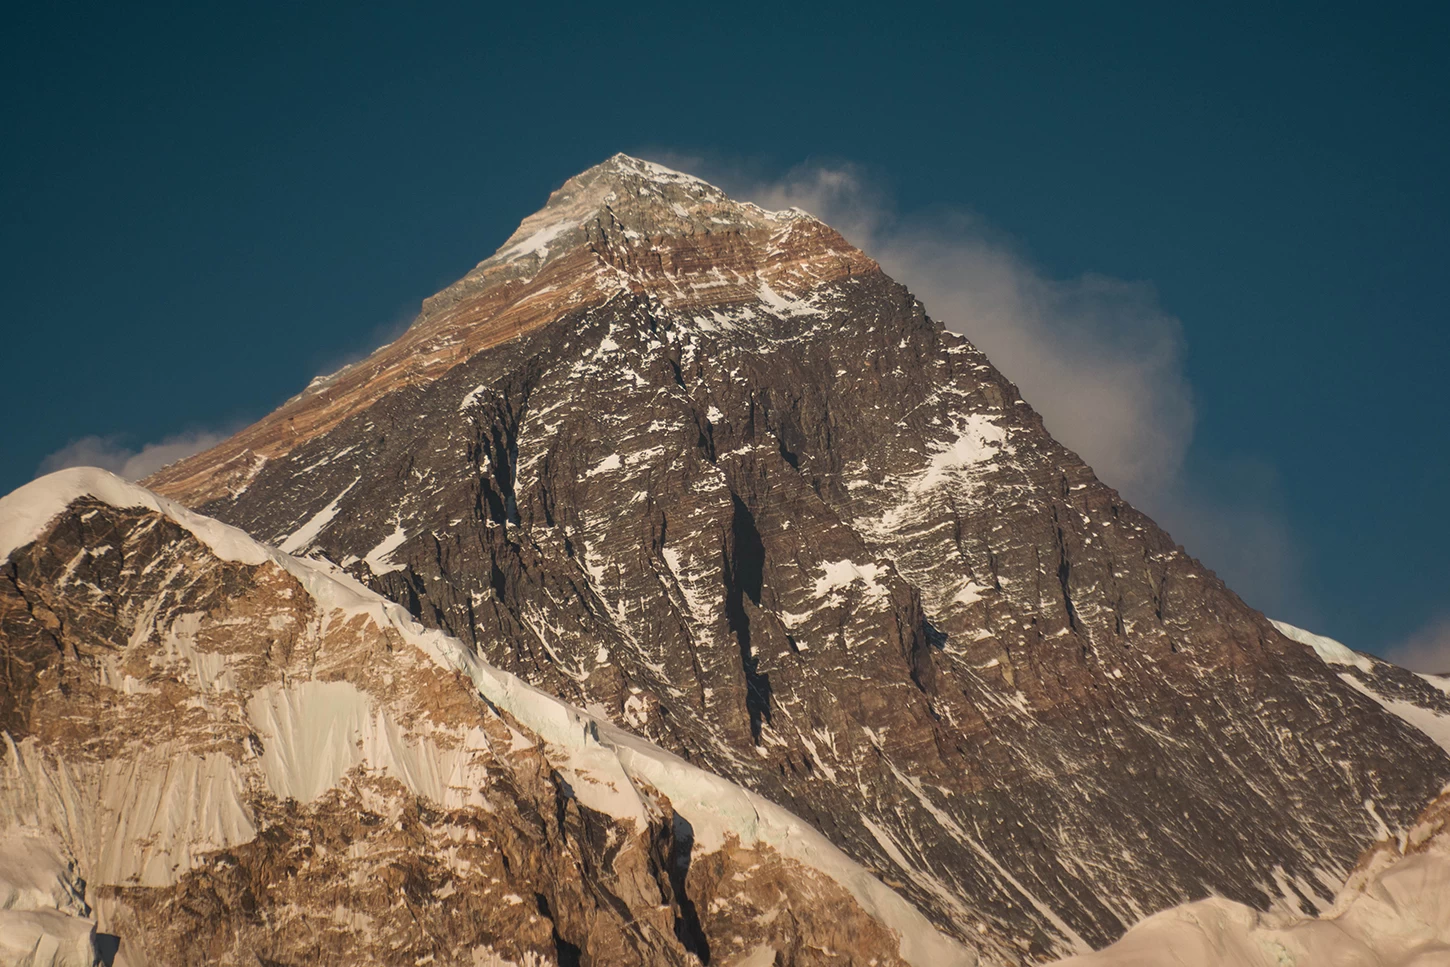  Close-up view of Mount Everest from Kalapatthar 5,560m. 